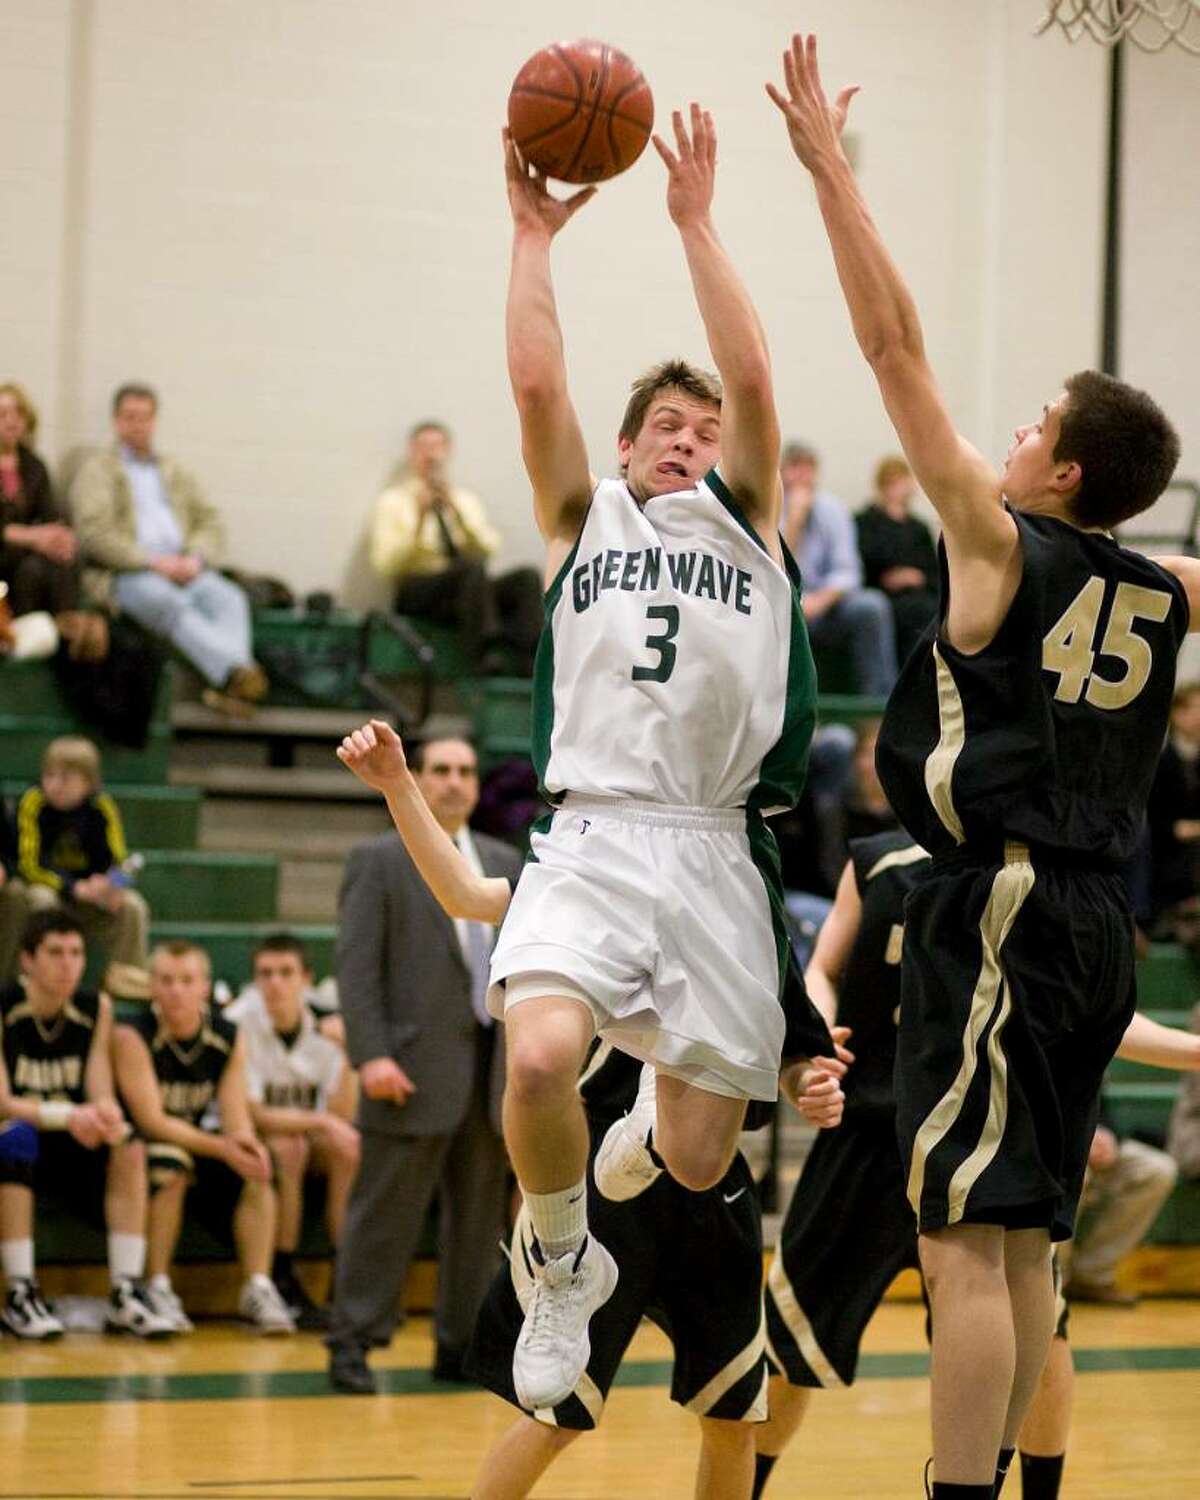 New Milford's John Krafick (3) puts up a shot over Joel barlow's Nelson Diaz during an SWC game Friday night at New Milford High.